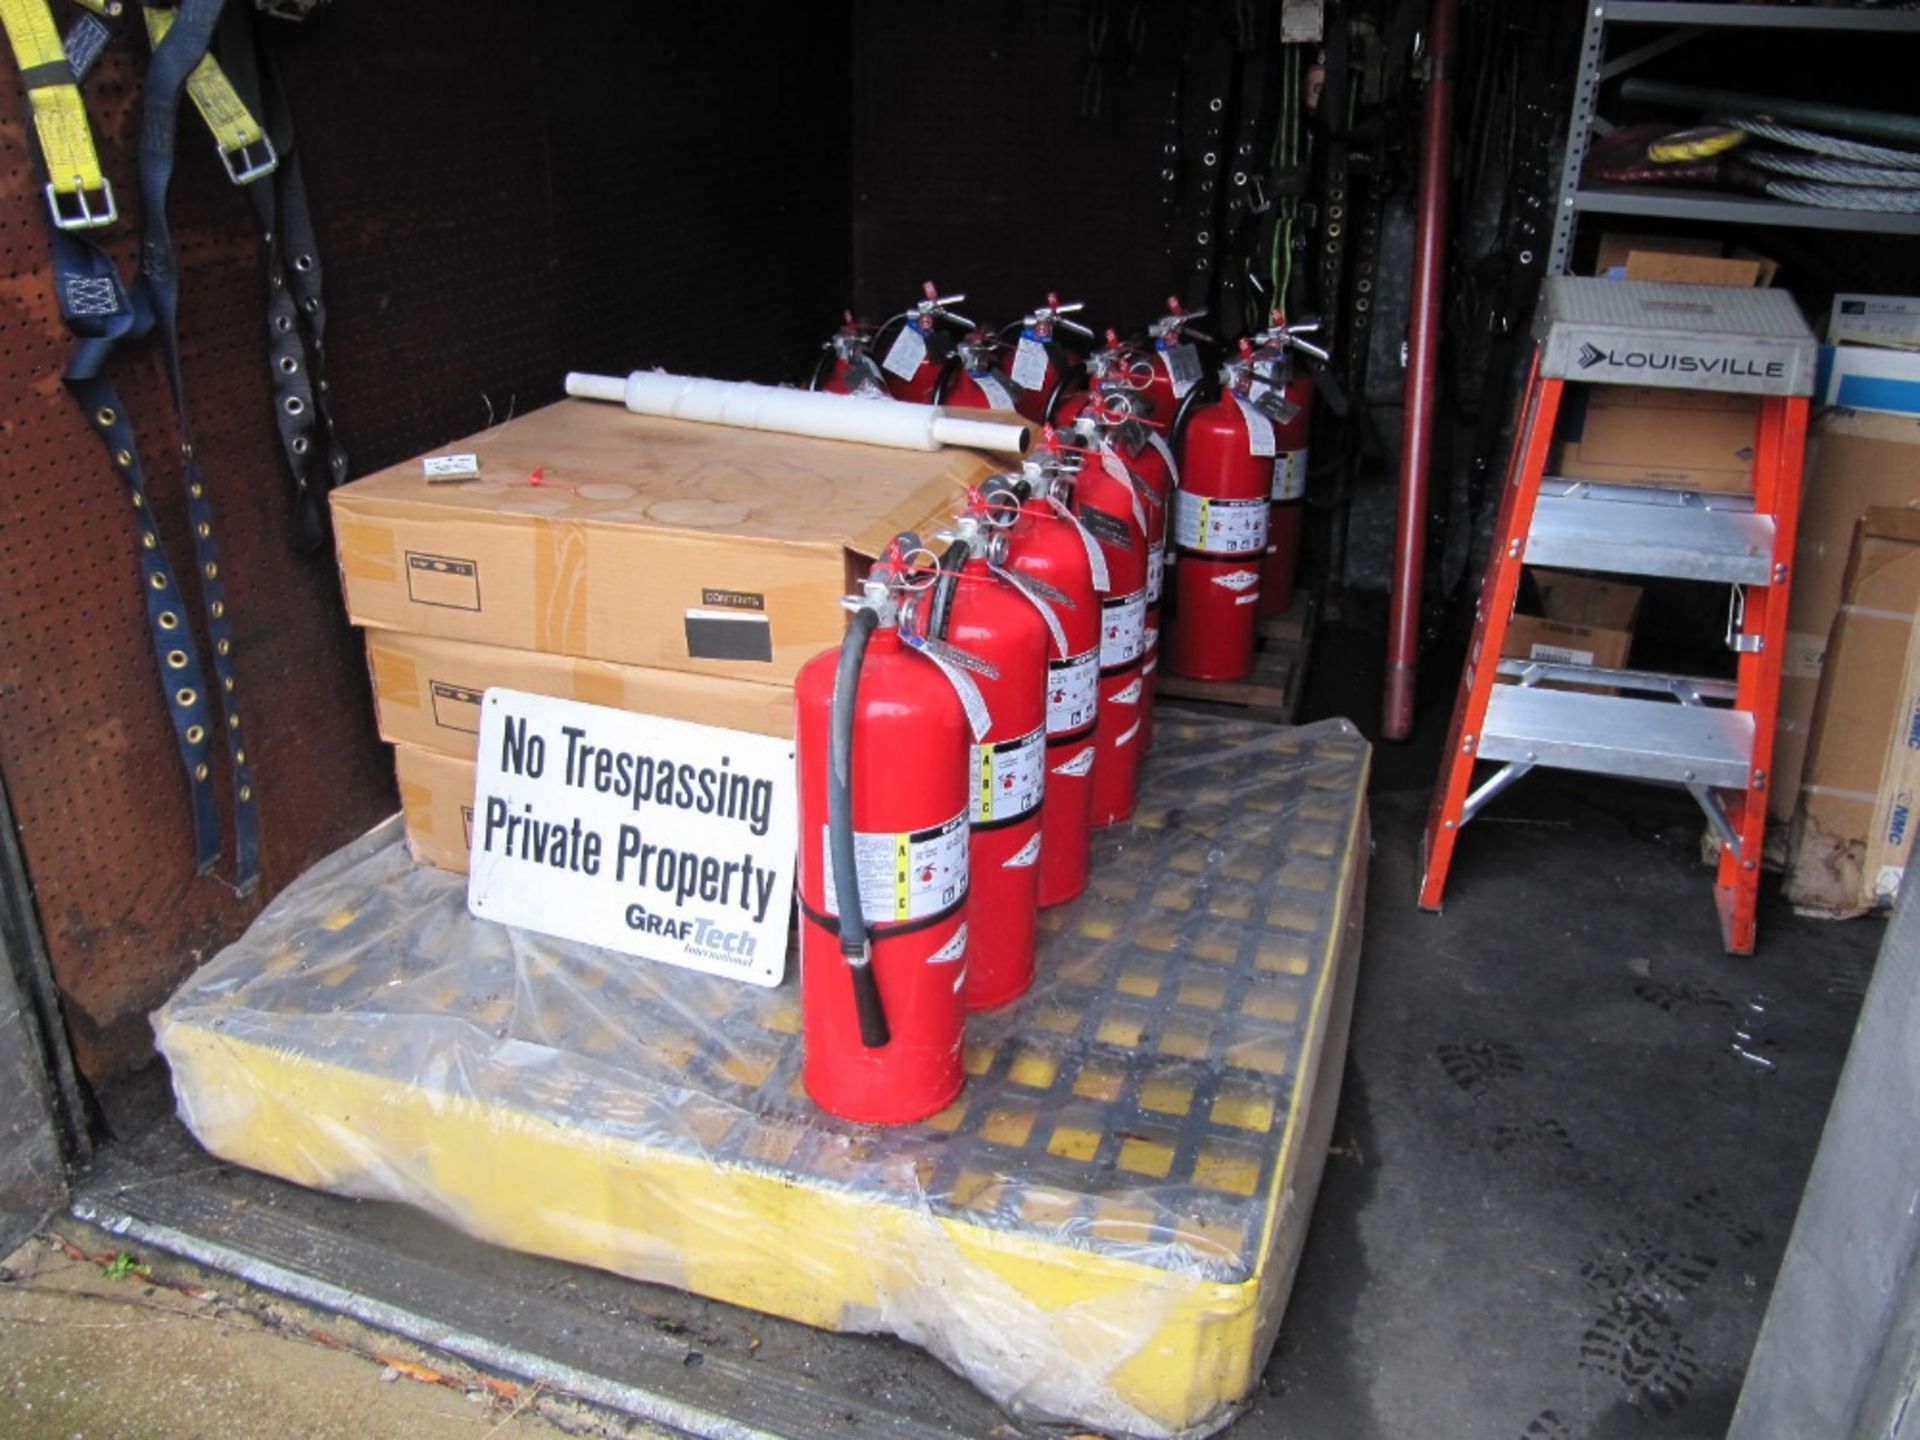 Lot including (28) assorted dry chemical fire extinguishers, 3' step ladder, (3) assorted spill